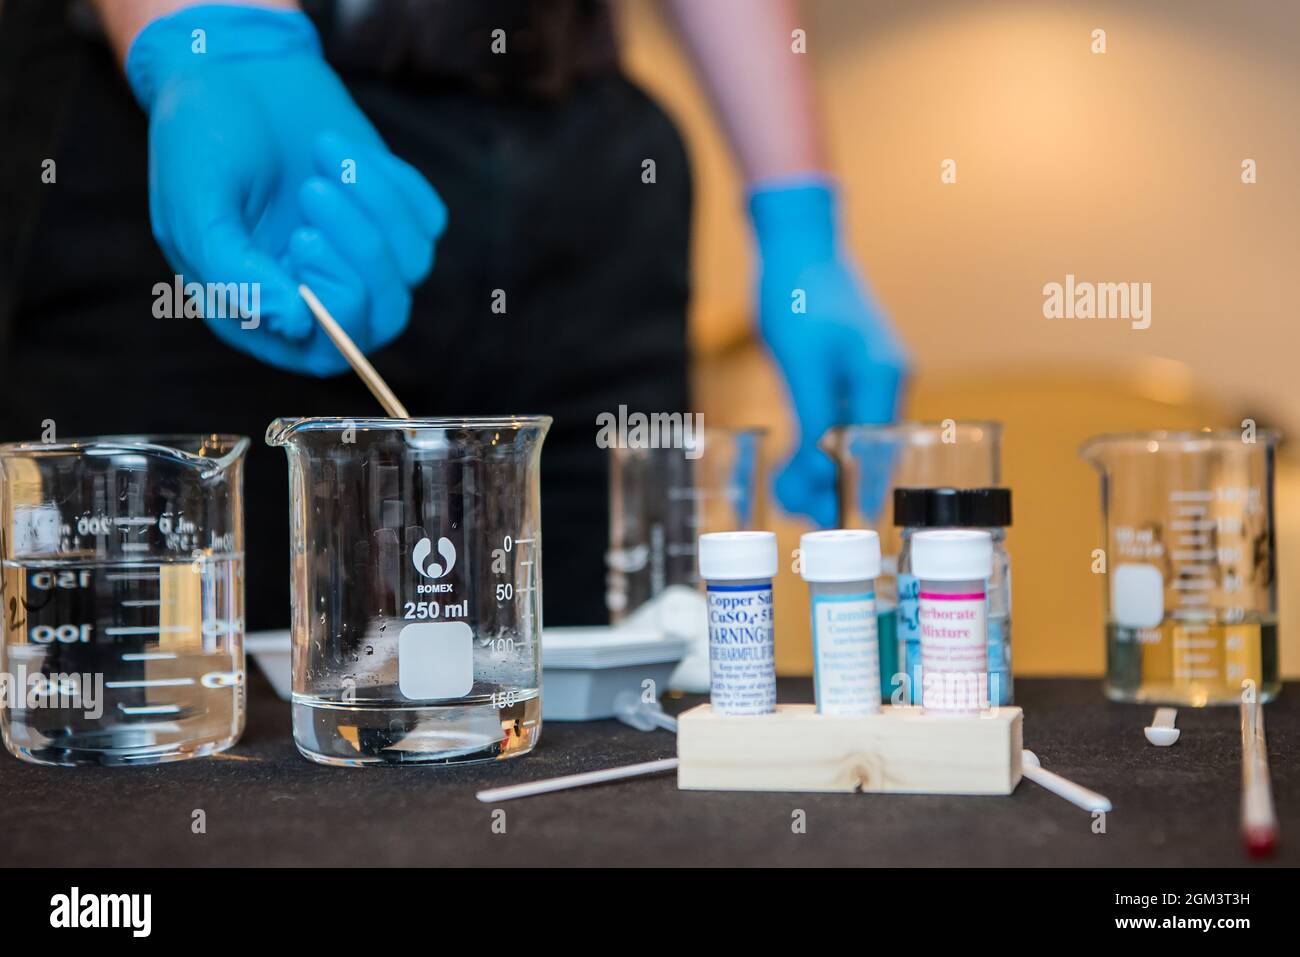 Latex gloved hand pour a beaker of liquid during a science experiment in school lab. Stock Photo